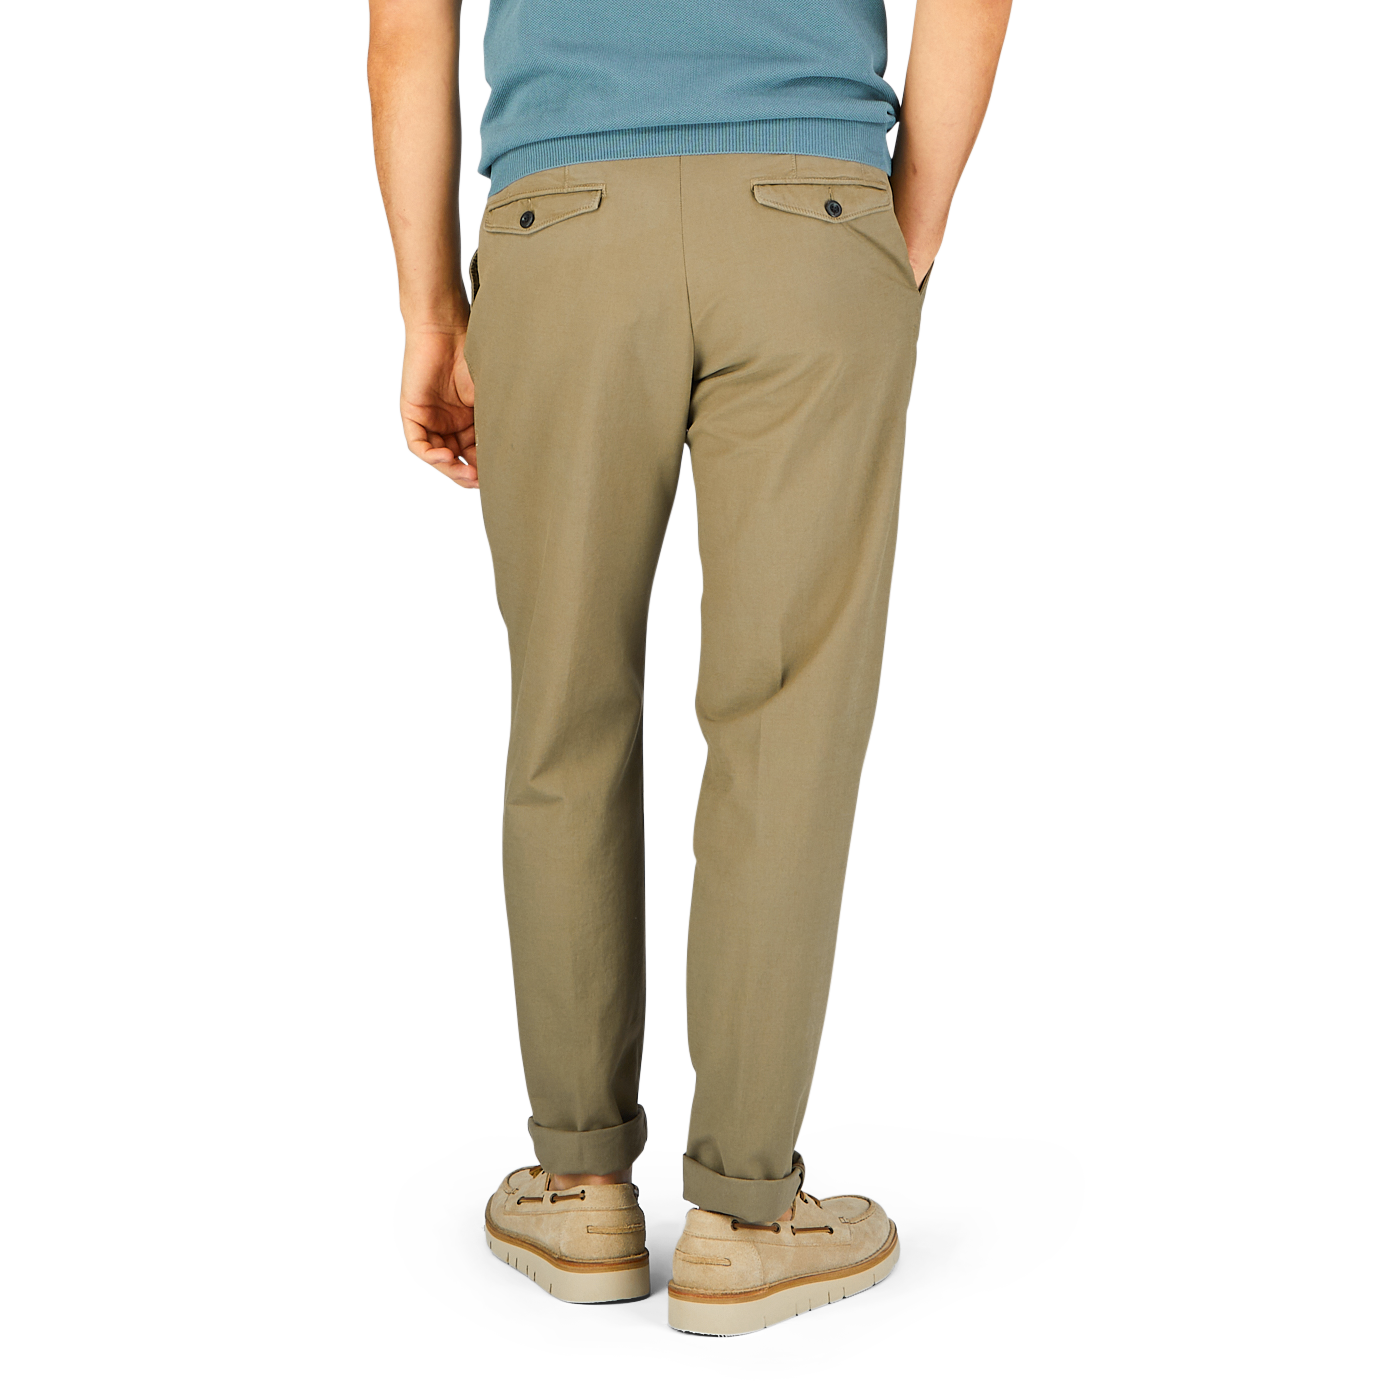 A person standing in Incotex Grass Green Cotton Stretch Pleated Chinos and beige sneakers against a blue background.